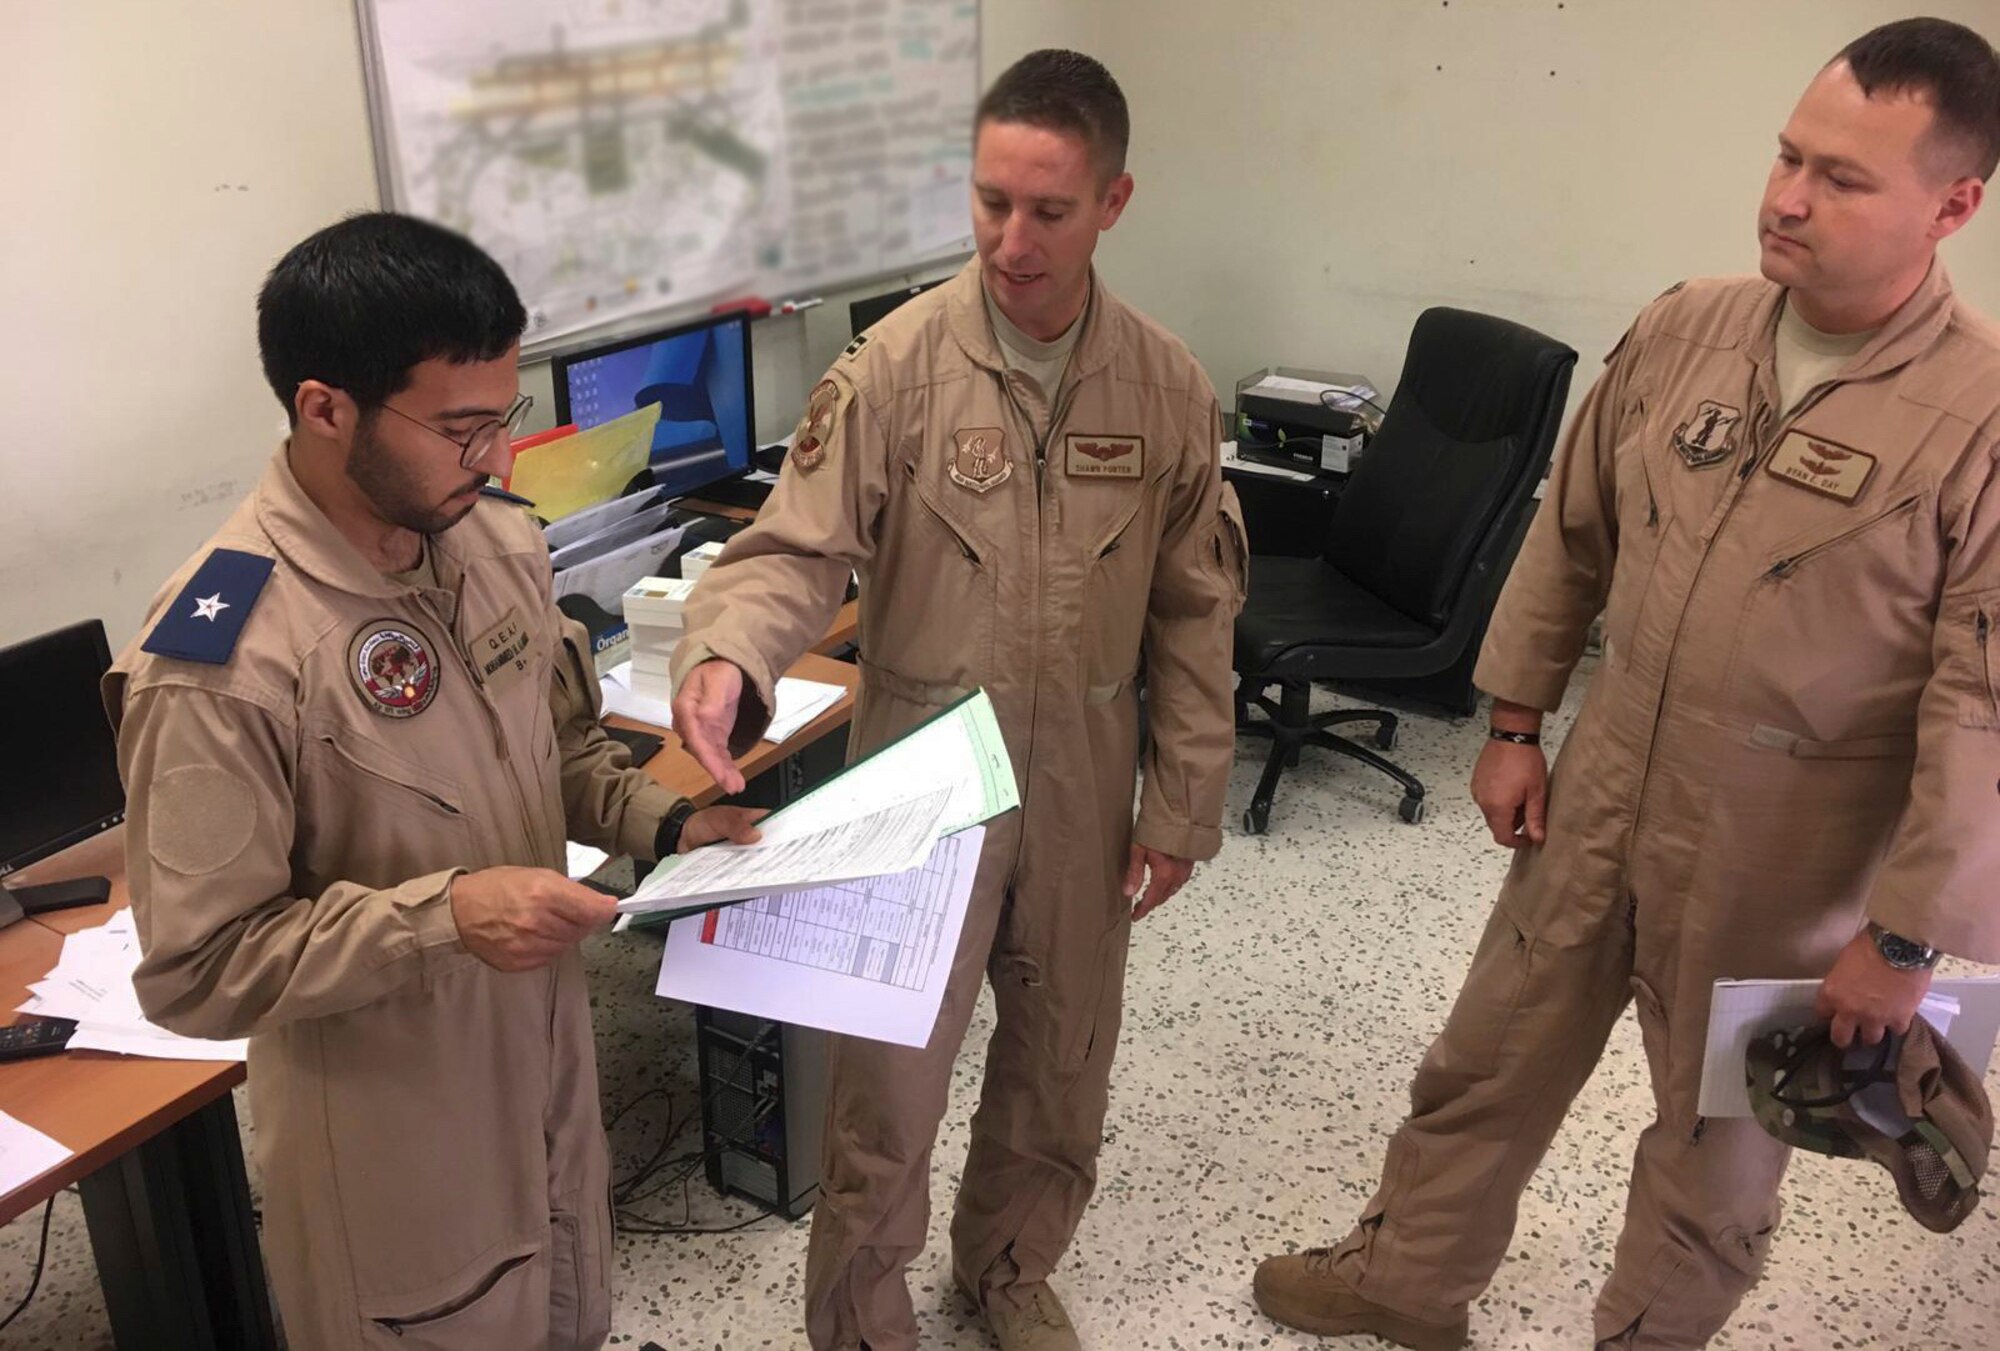 Members of the West Virginia Air National Guard's 130th and 167th Airlift Wing discuss current operations planning and procedures with representatives of the Qatari Emiri Air Force Aug. 17., 2019, at Al Udeid Air Base, Qatar. The subject matter expert exchange was the second WVANG-QEAF partnership meeting to be held since the announcement of the new partnership in May 2018, which marked the second partner nation for the WVNG and the sixth SPP country in the U.S. Central Command area of responsibility for the National Guard. (Courtesy photo)